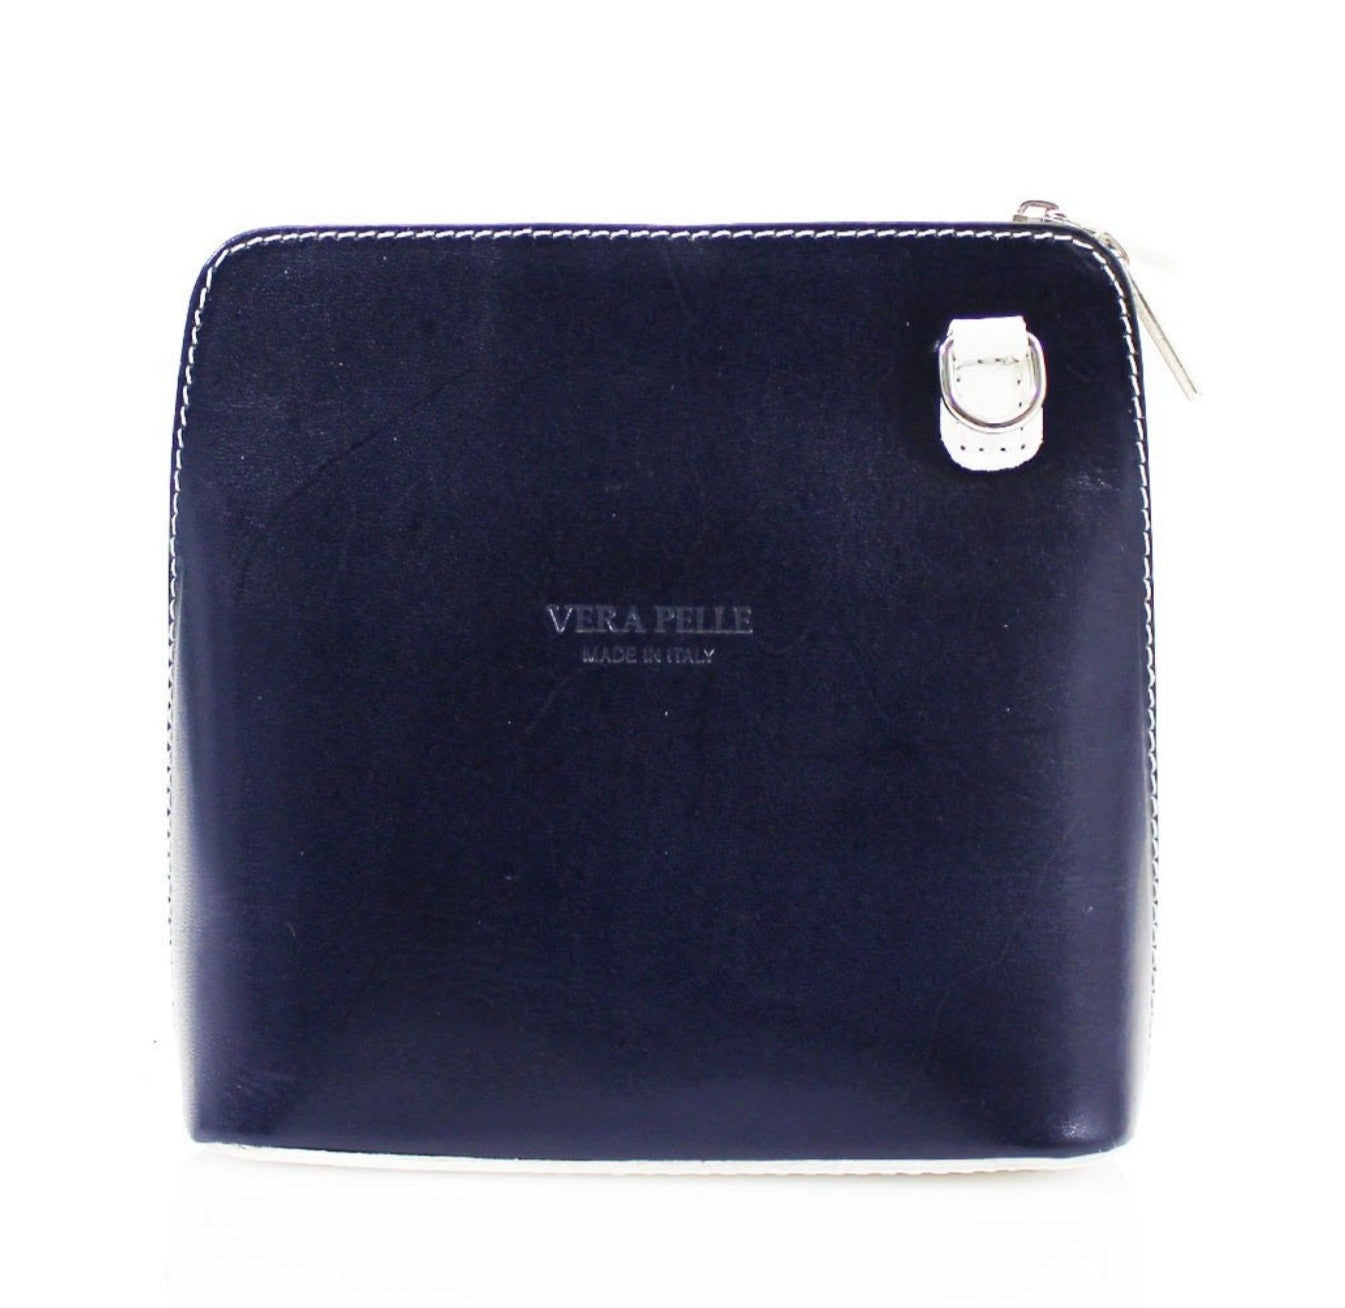 VP Real Leather Small Square Bag